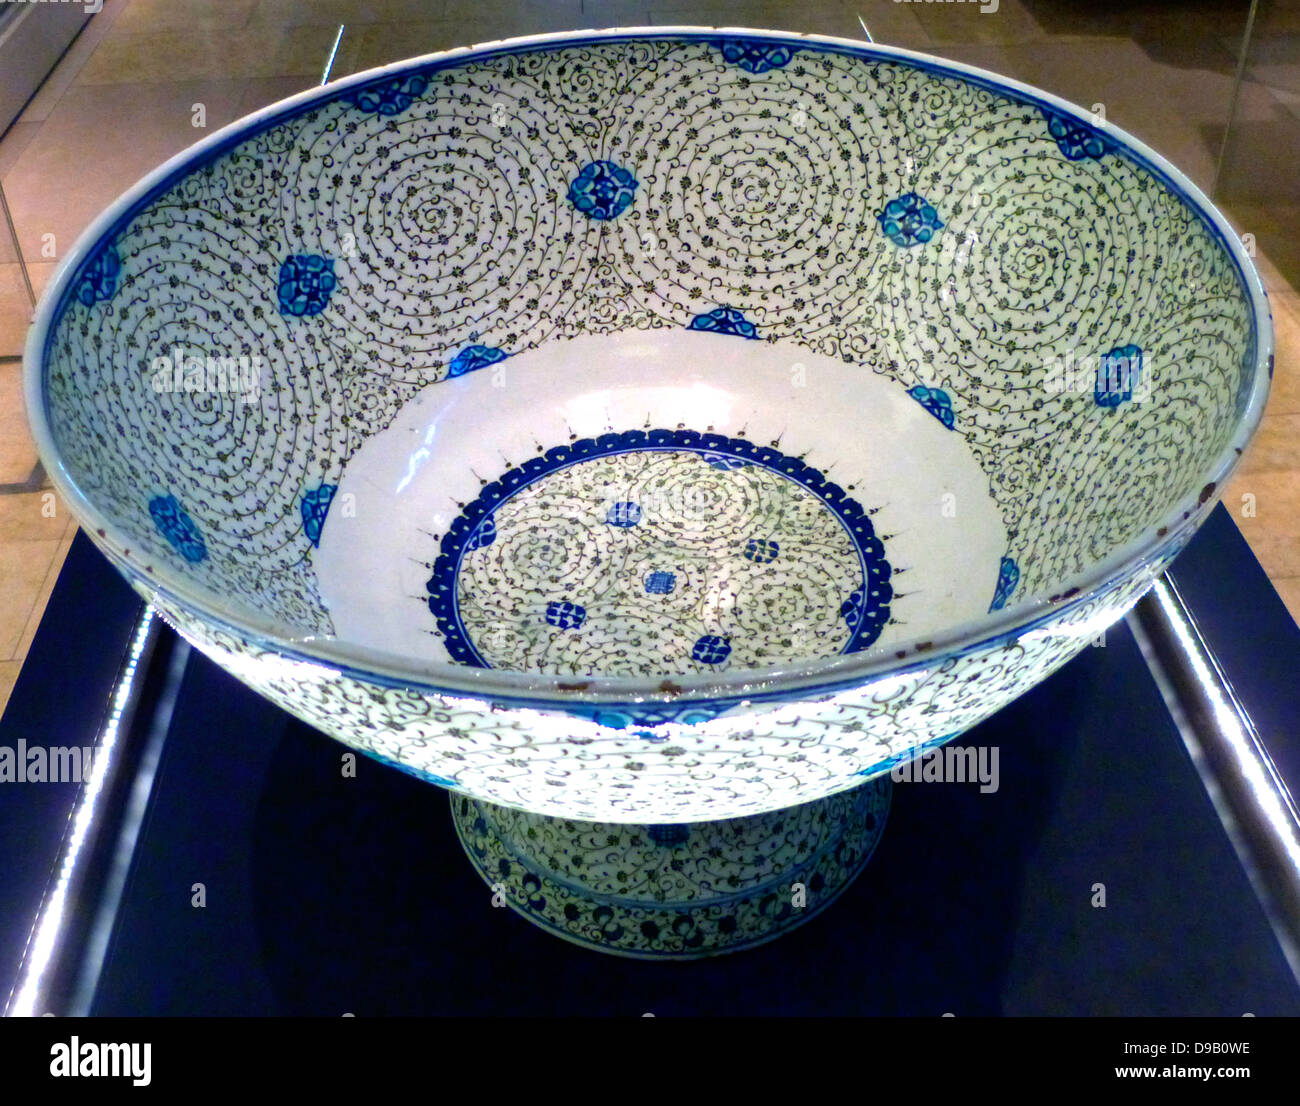 Basin with 'Golden Horn' Design, Turkey, probably Iznik.  About 1545.  This basin is decorated with tight concentric scrolls in black, which bear tiny leaves and flowers.  Design named 'Golden Horn' because examples excavated near the inlet in Istanbul known as the Golden Horn. Stock Photo